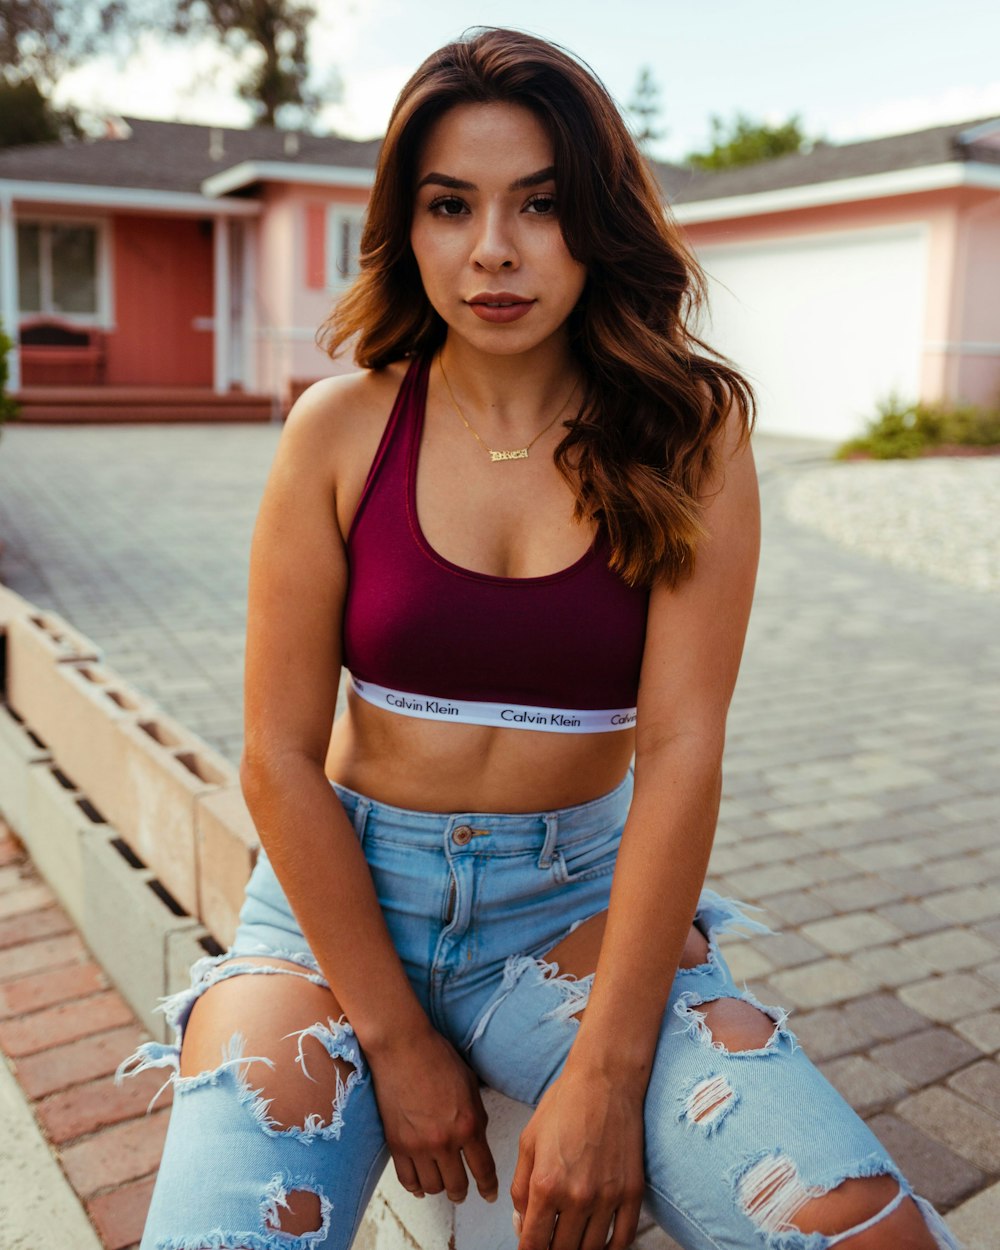 Woman in purple sports bra and blue denim shorts sitting on concrete stairs  during daytime photo – Free Clothing Image on Unsplash